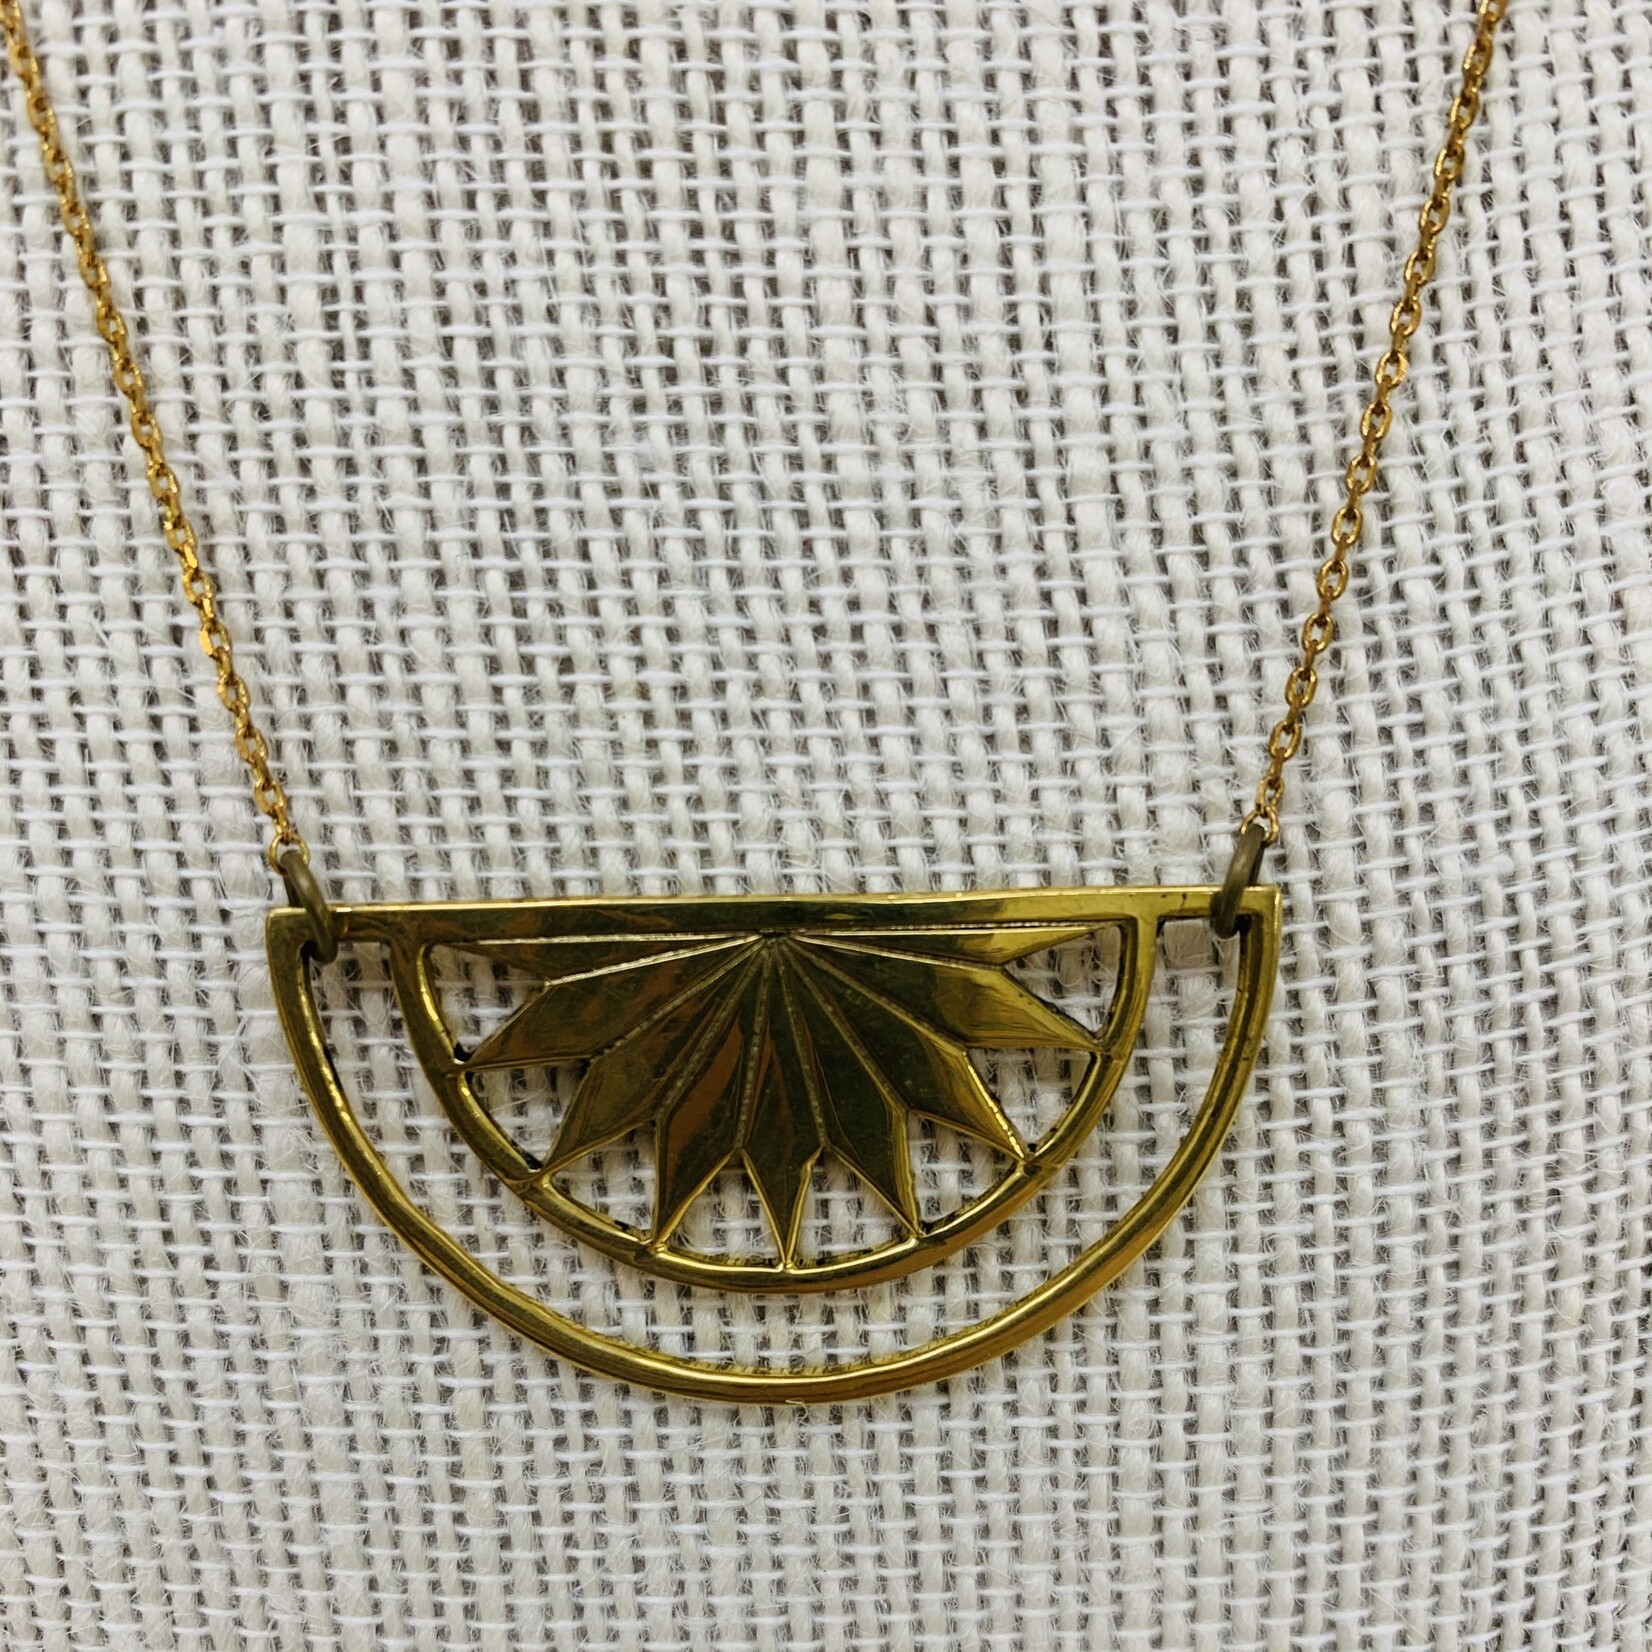 Ten Thousand Villages Sun Ray Resilience Necklace, Cambodia